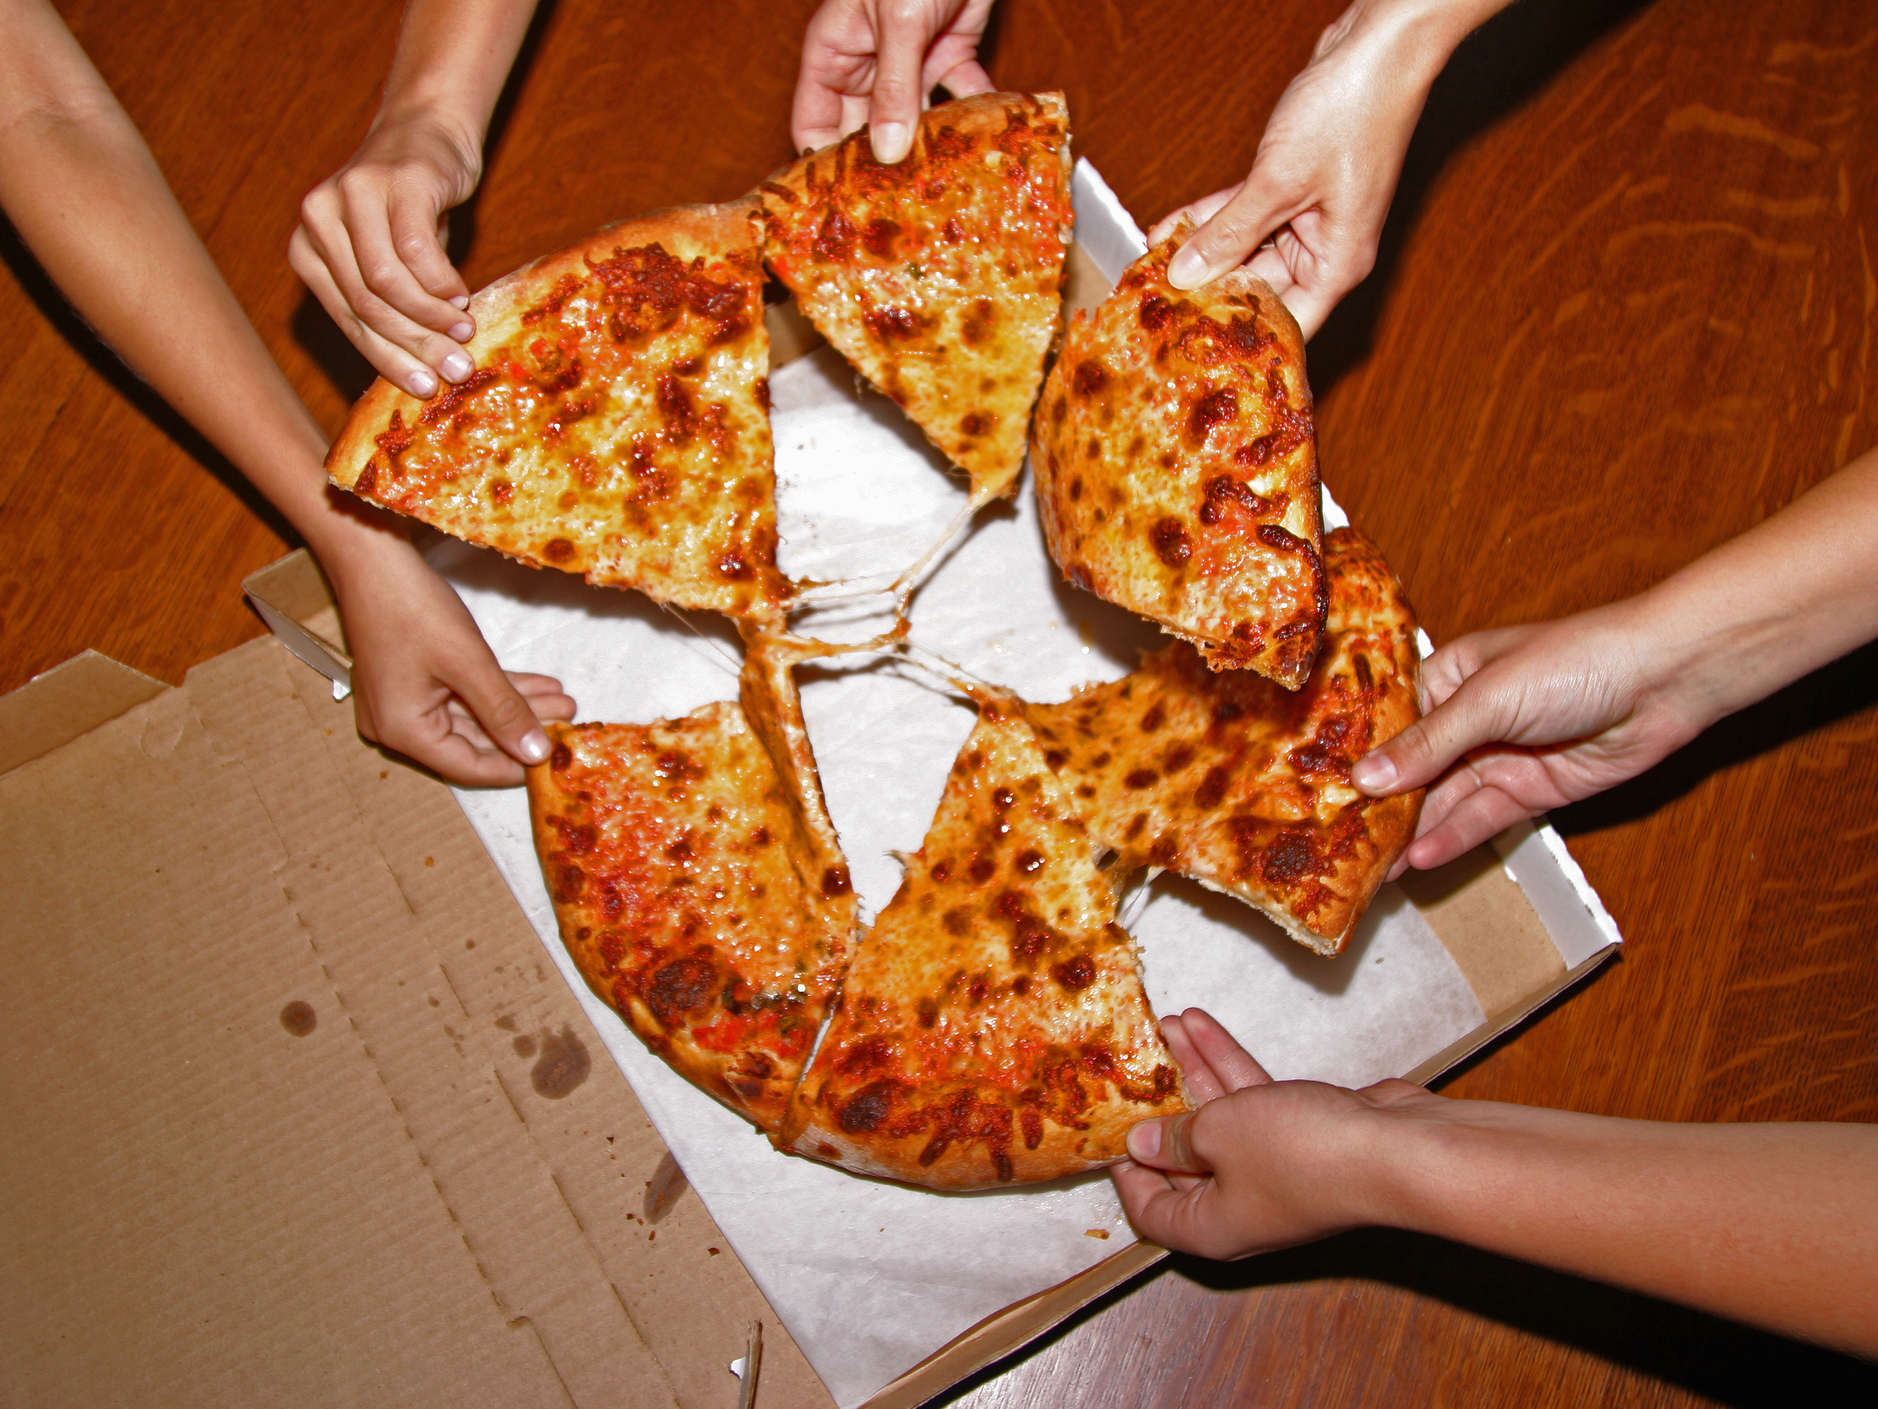 People eating pizzza slices